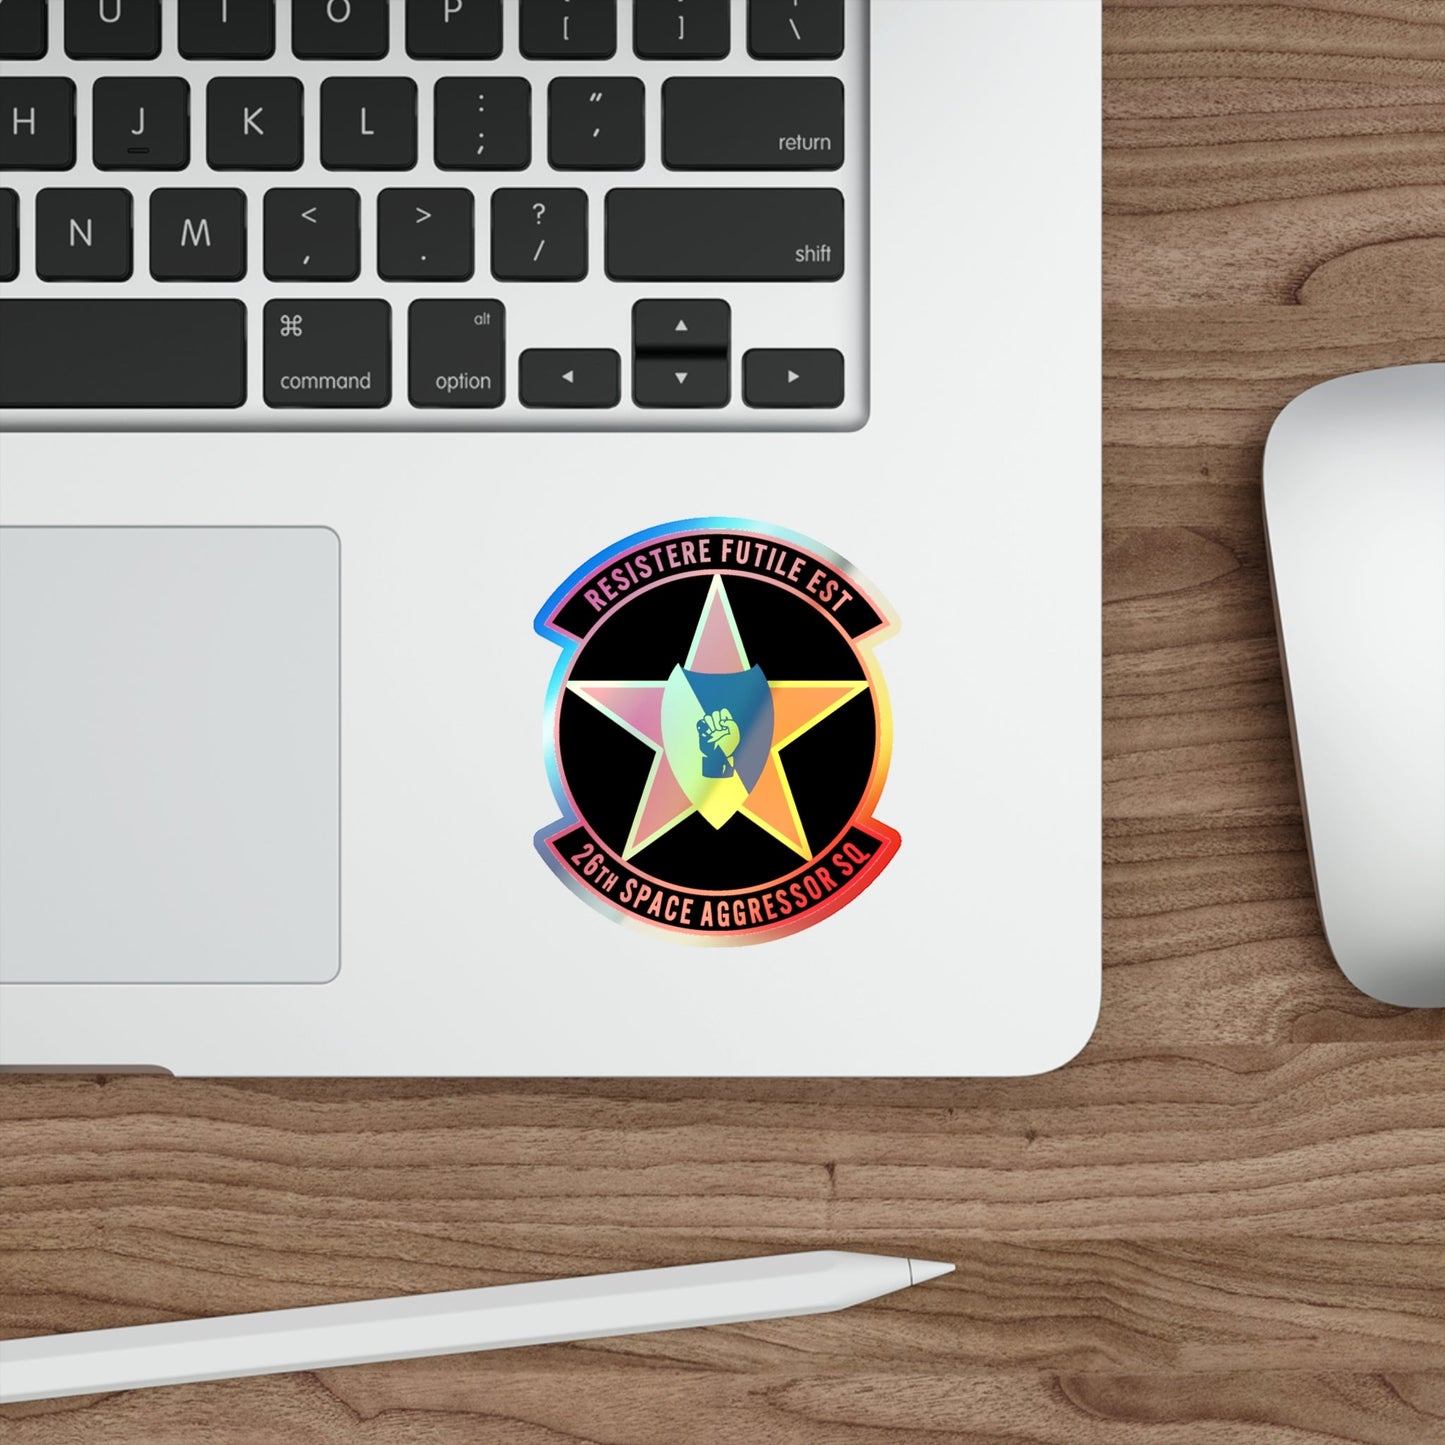 26TH Space Aggressor Sq. v2 (U.S. Air Force) Holographic STICKER Die-Cut Vinyl Decal-The Sticker Space